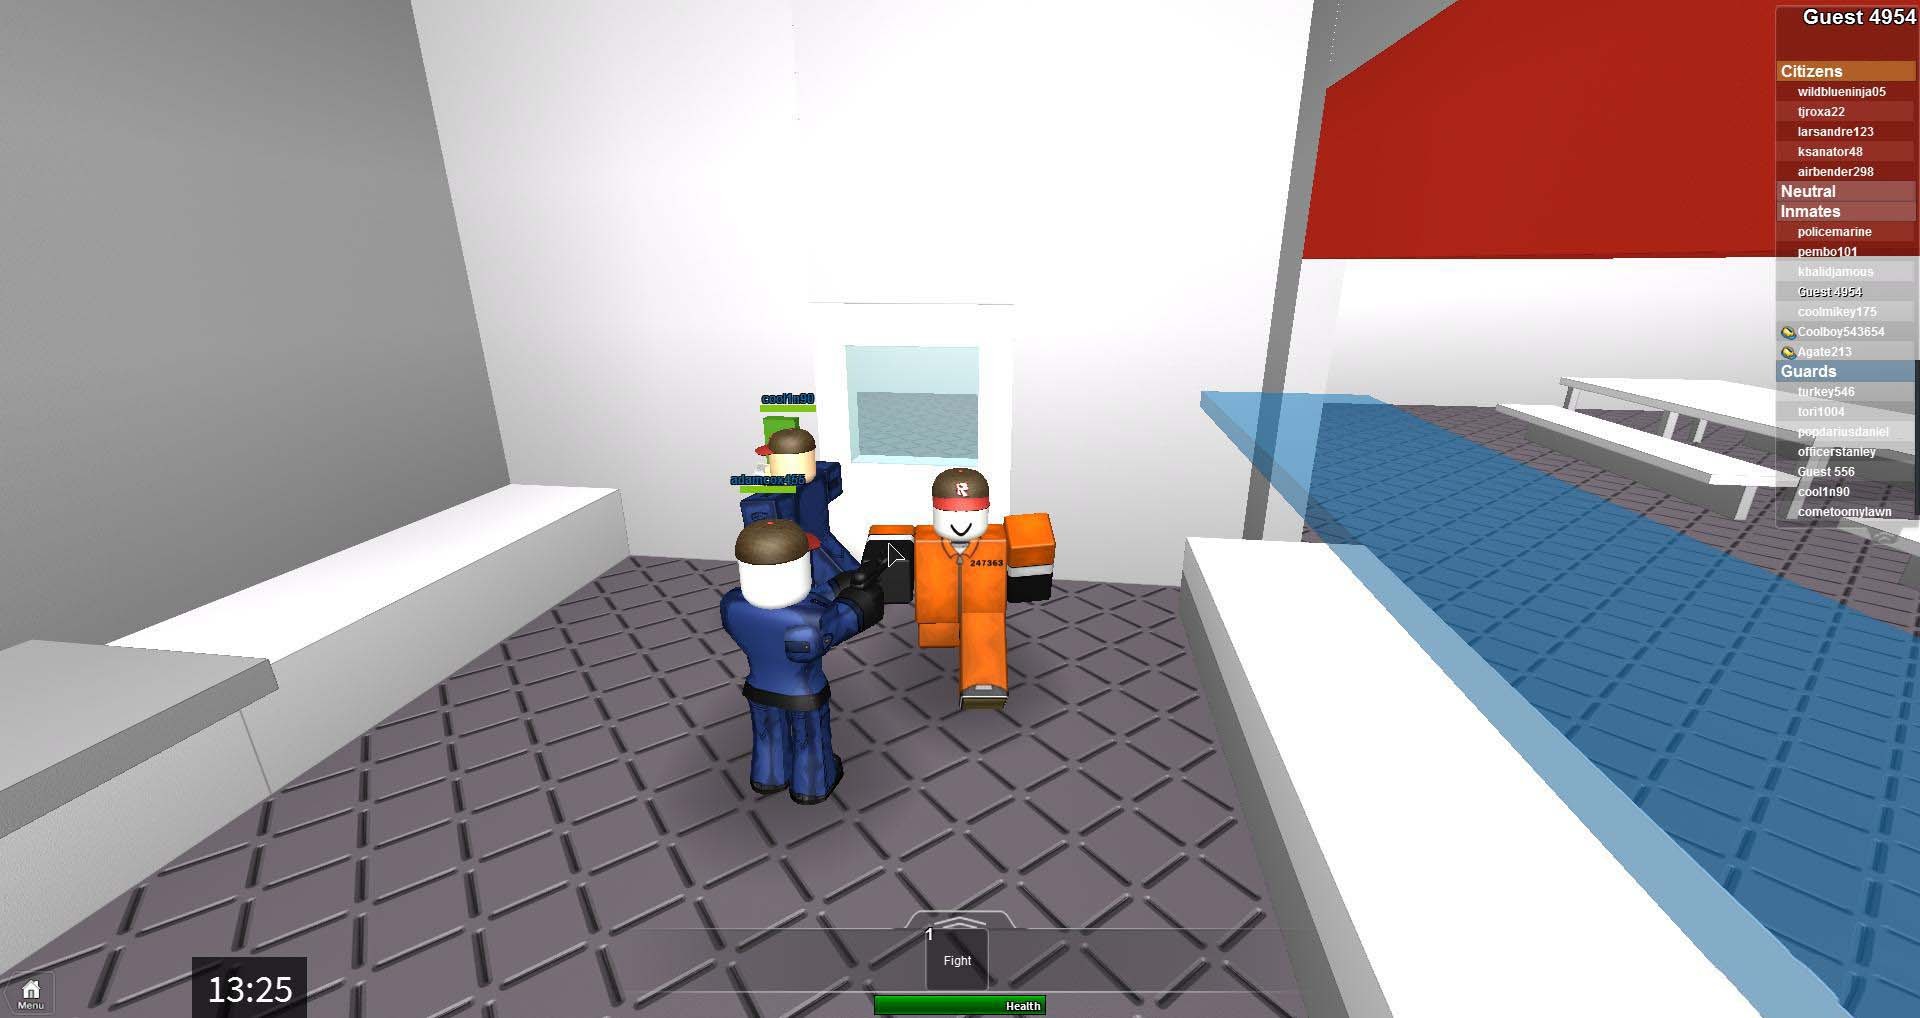 Roblox Top Up 1700 Robux, Roblox